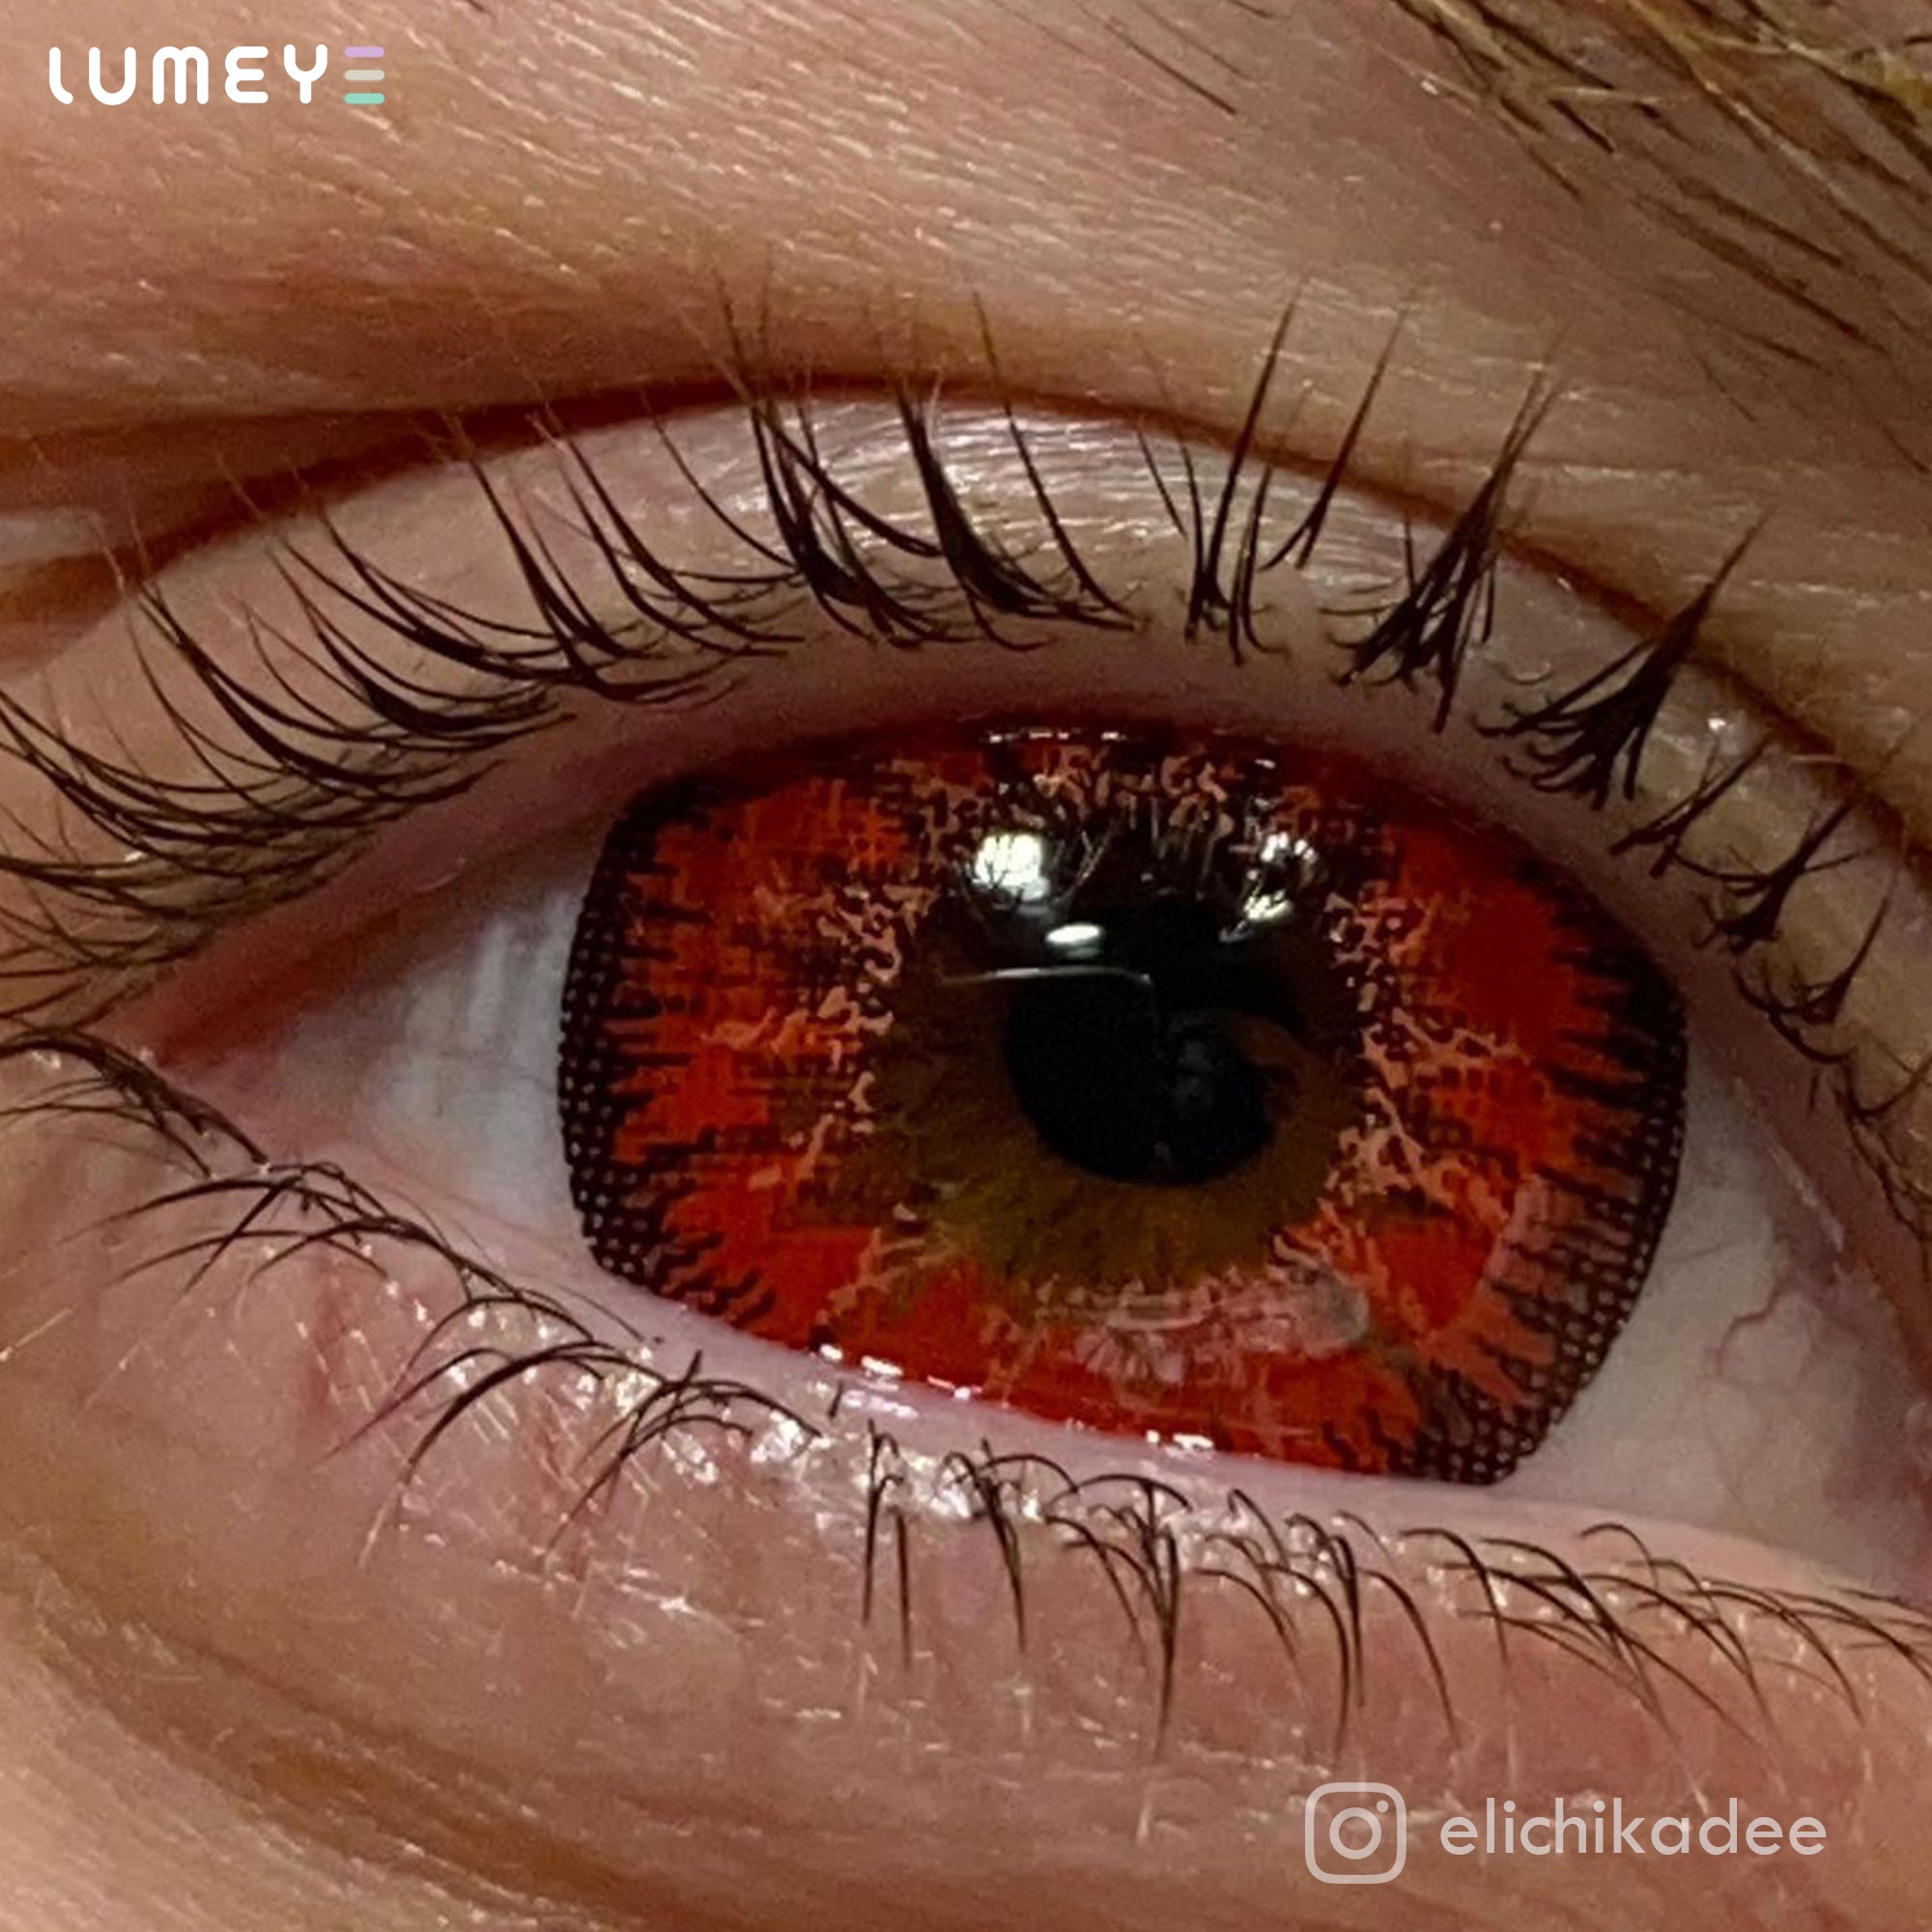 Best COLORED CONTACTS - LUMEYE Elf Red Colored Contact Lenses - LUMEYE